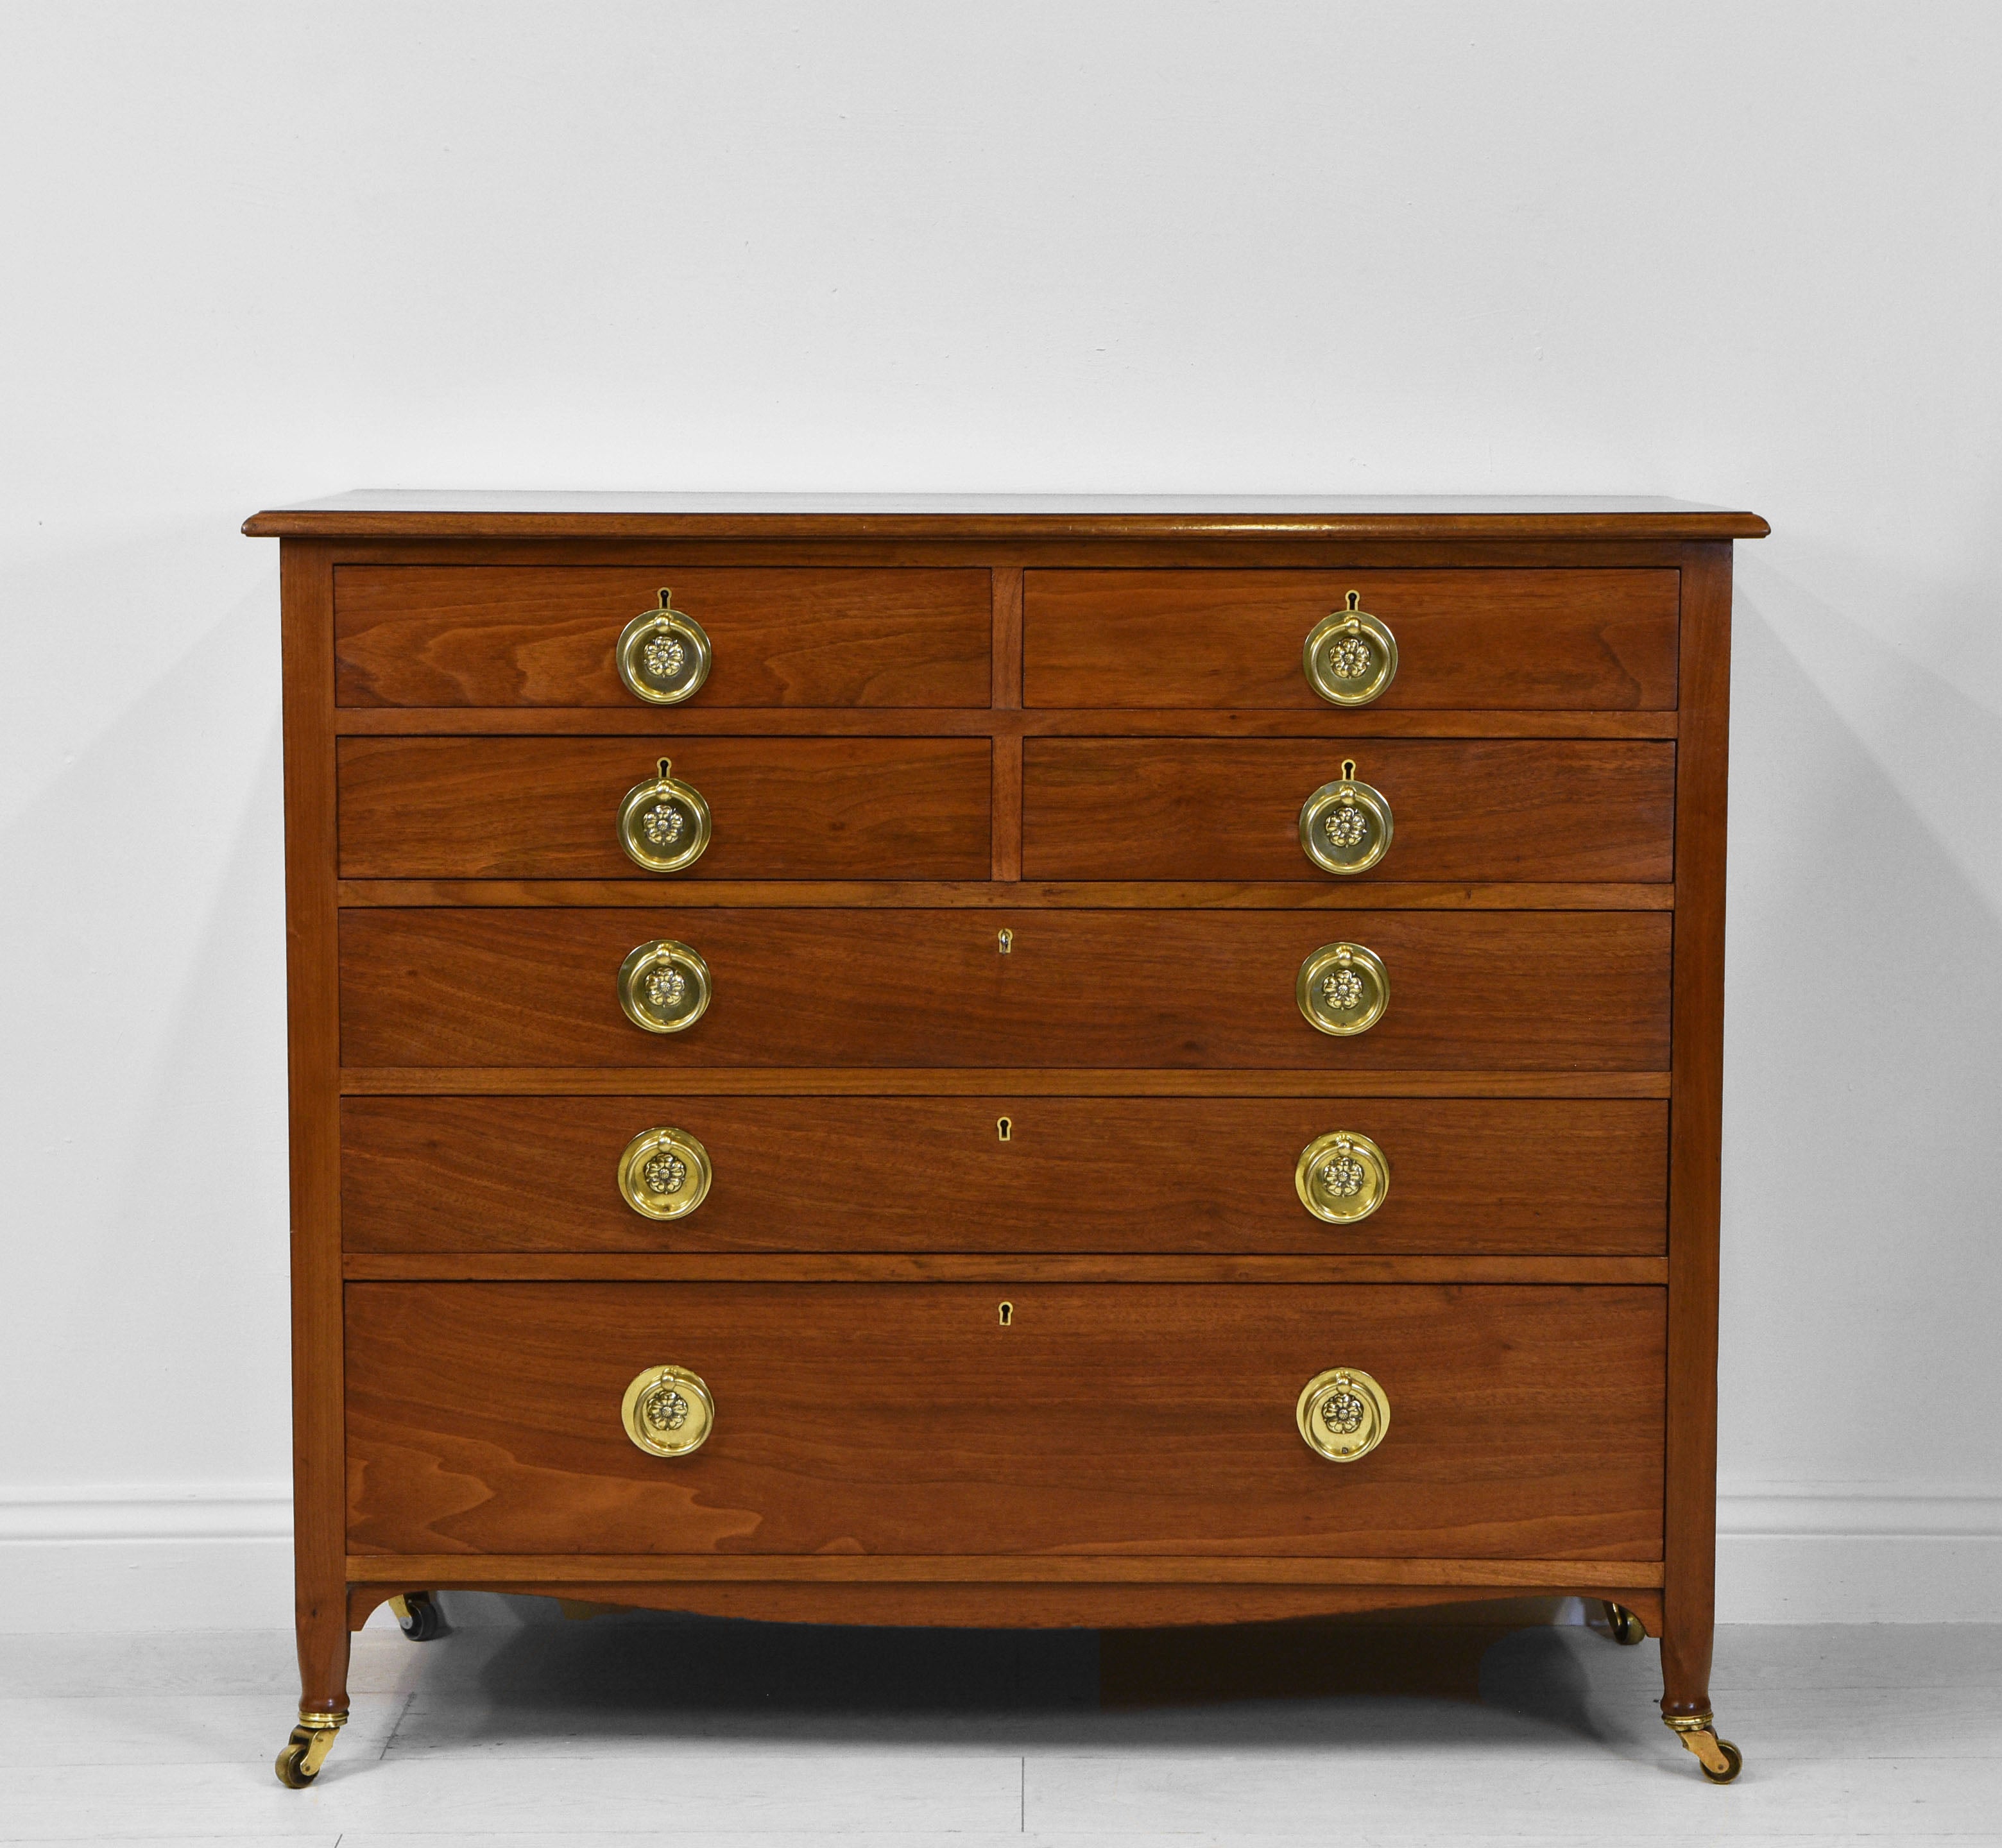 Superb Arts & Crafts figured walnut chest with an unusual arrangement of seven drawers. Original brass poppy-head embossed handles and brass castors. Circa 1900.

An excellent quality chest of drawers which has been sympathetically re-finished by